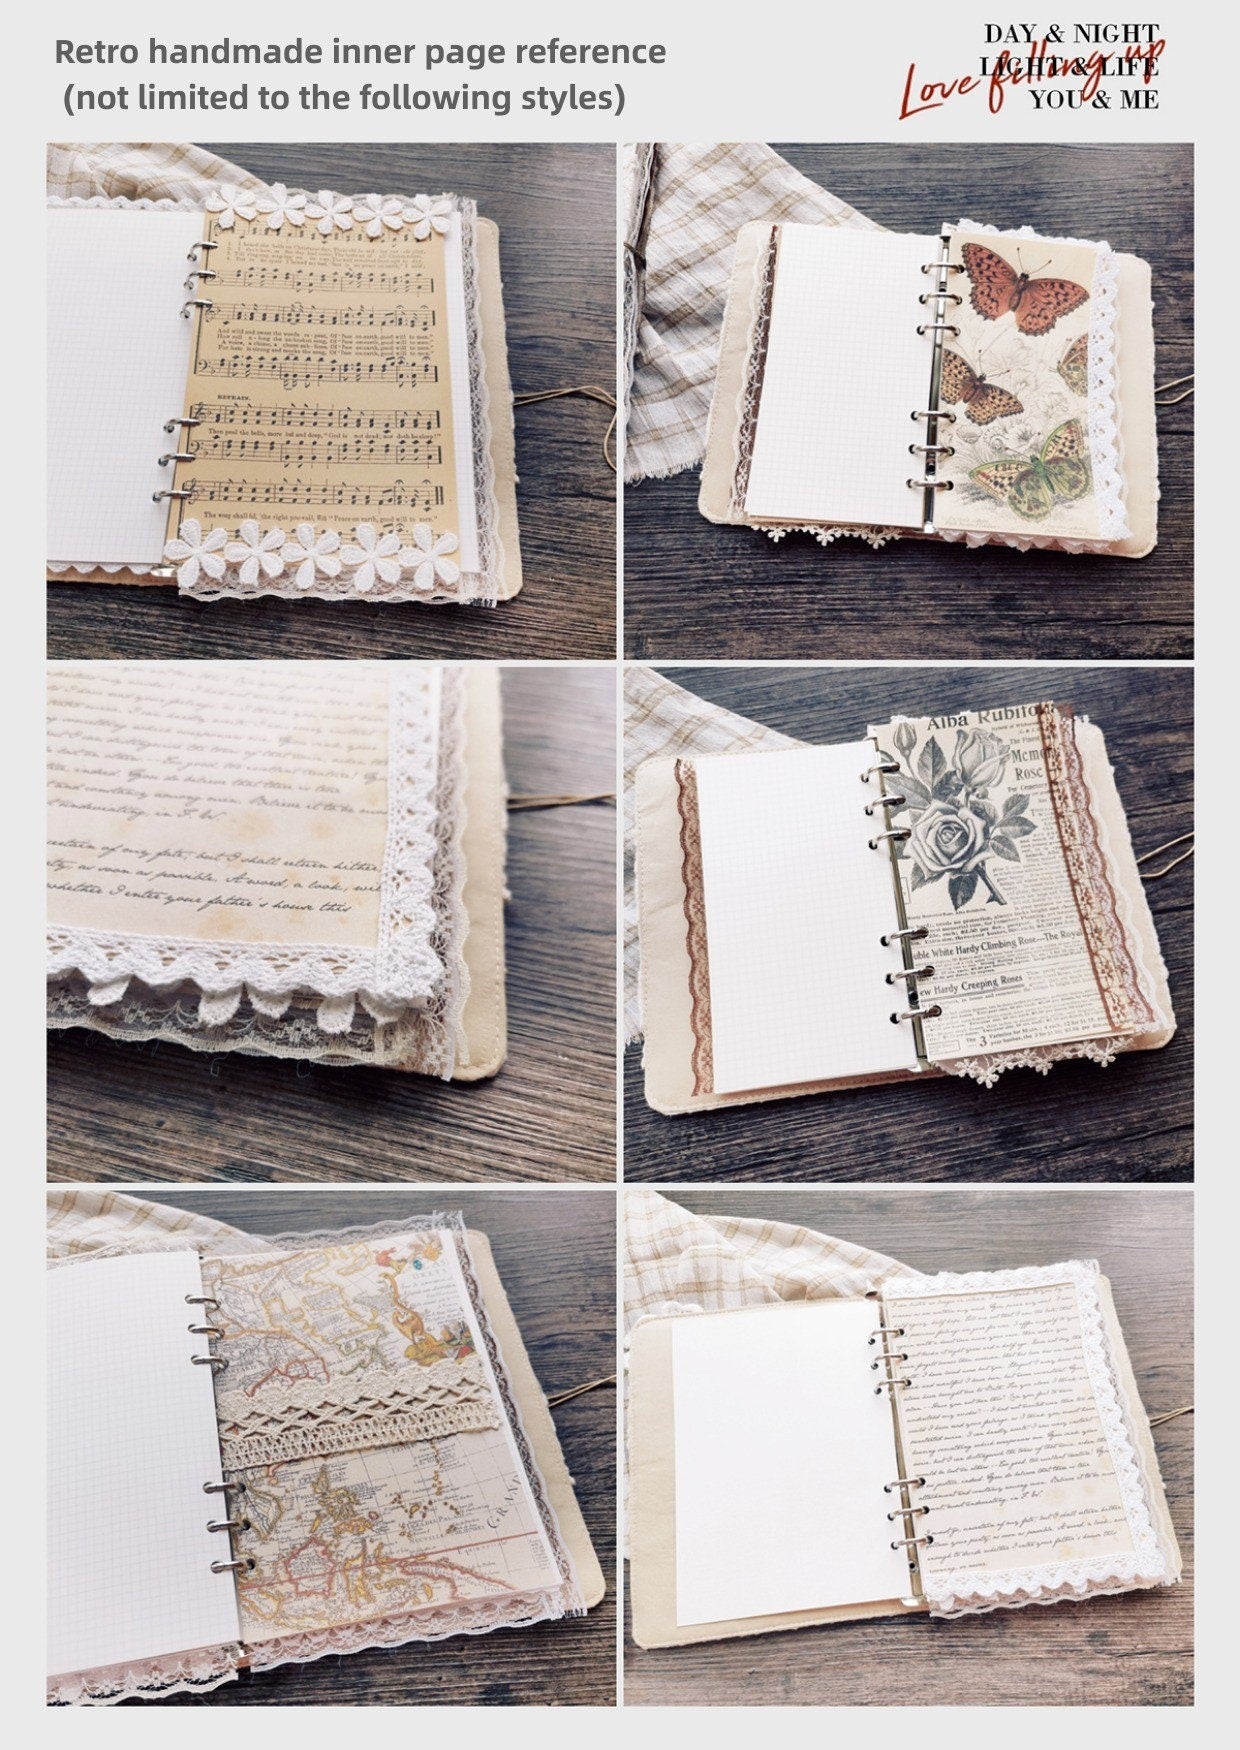 Retro Butterfly Lace Loose-leaf Journal A6 A5 Original White Lace Notebook Cover Handmade Refillable Fabric Notepad Card Booklet Girl's gift